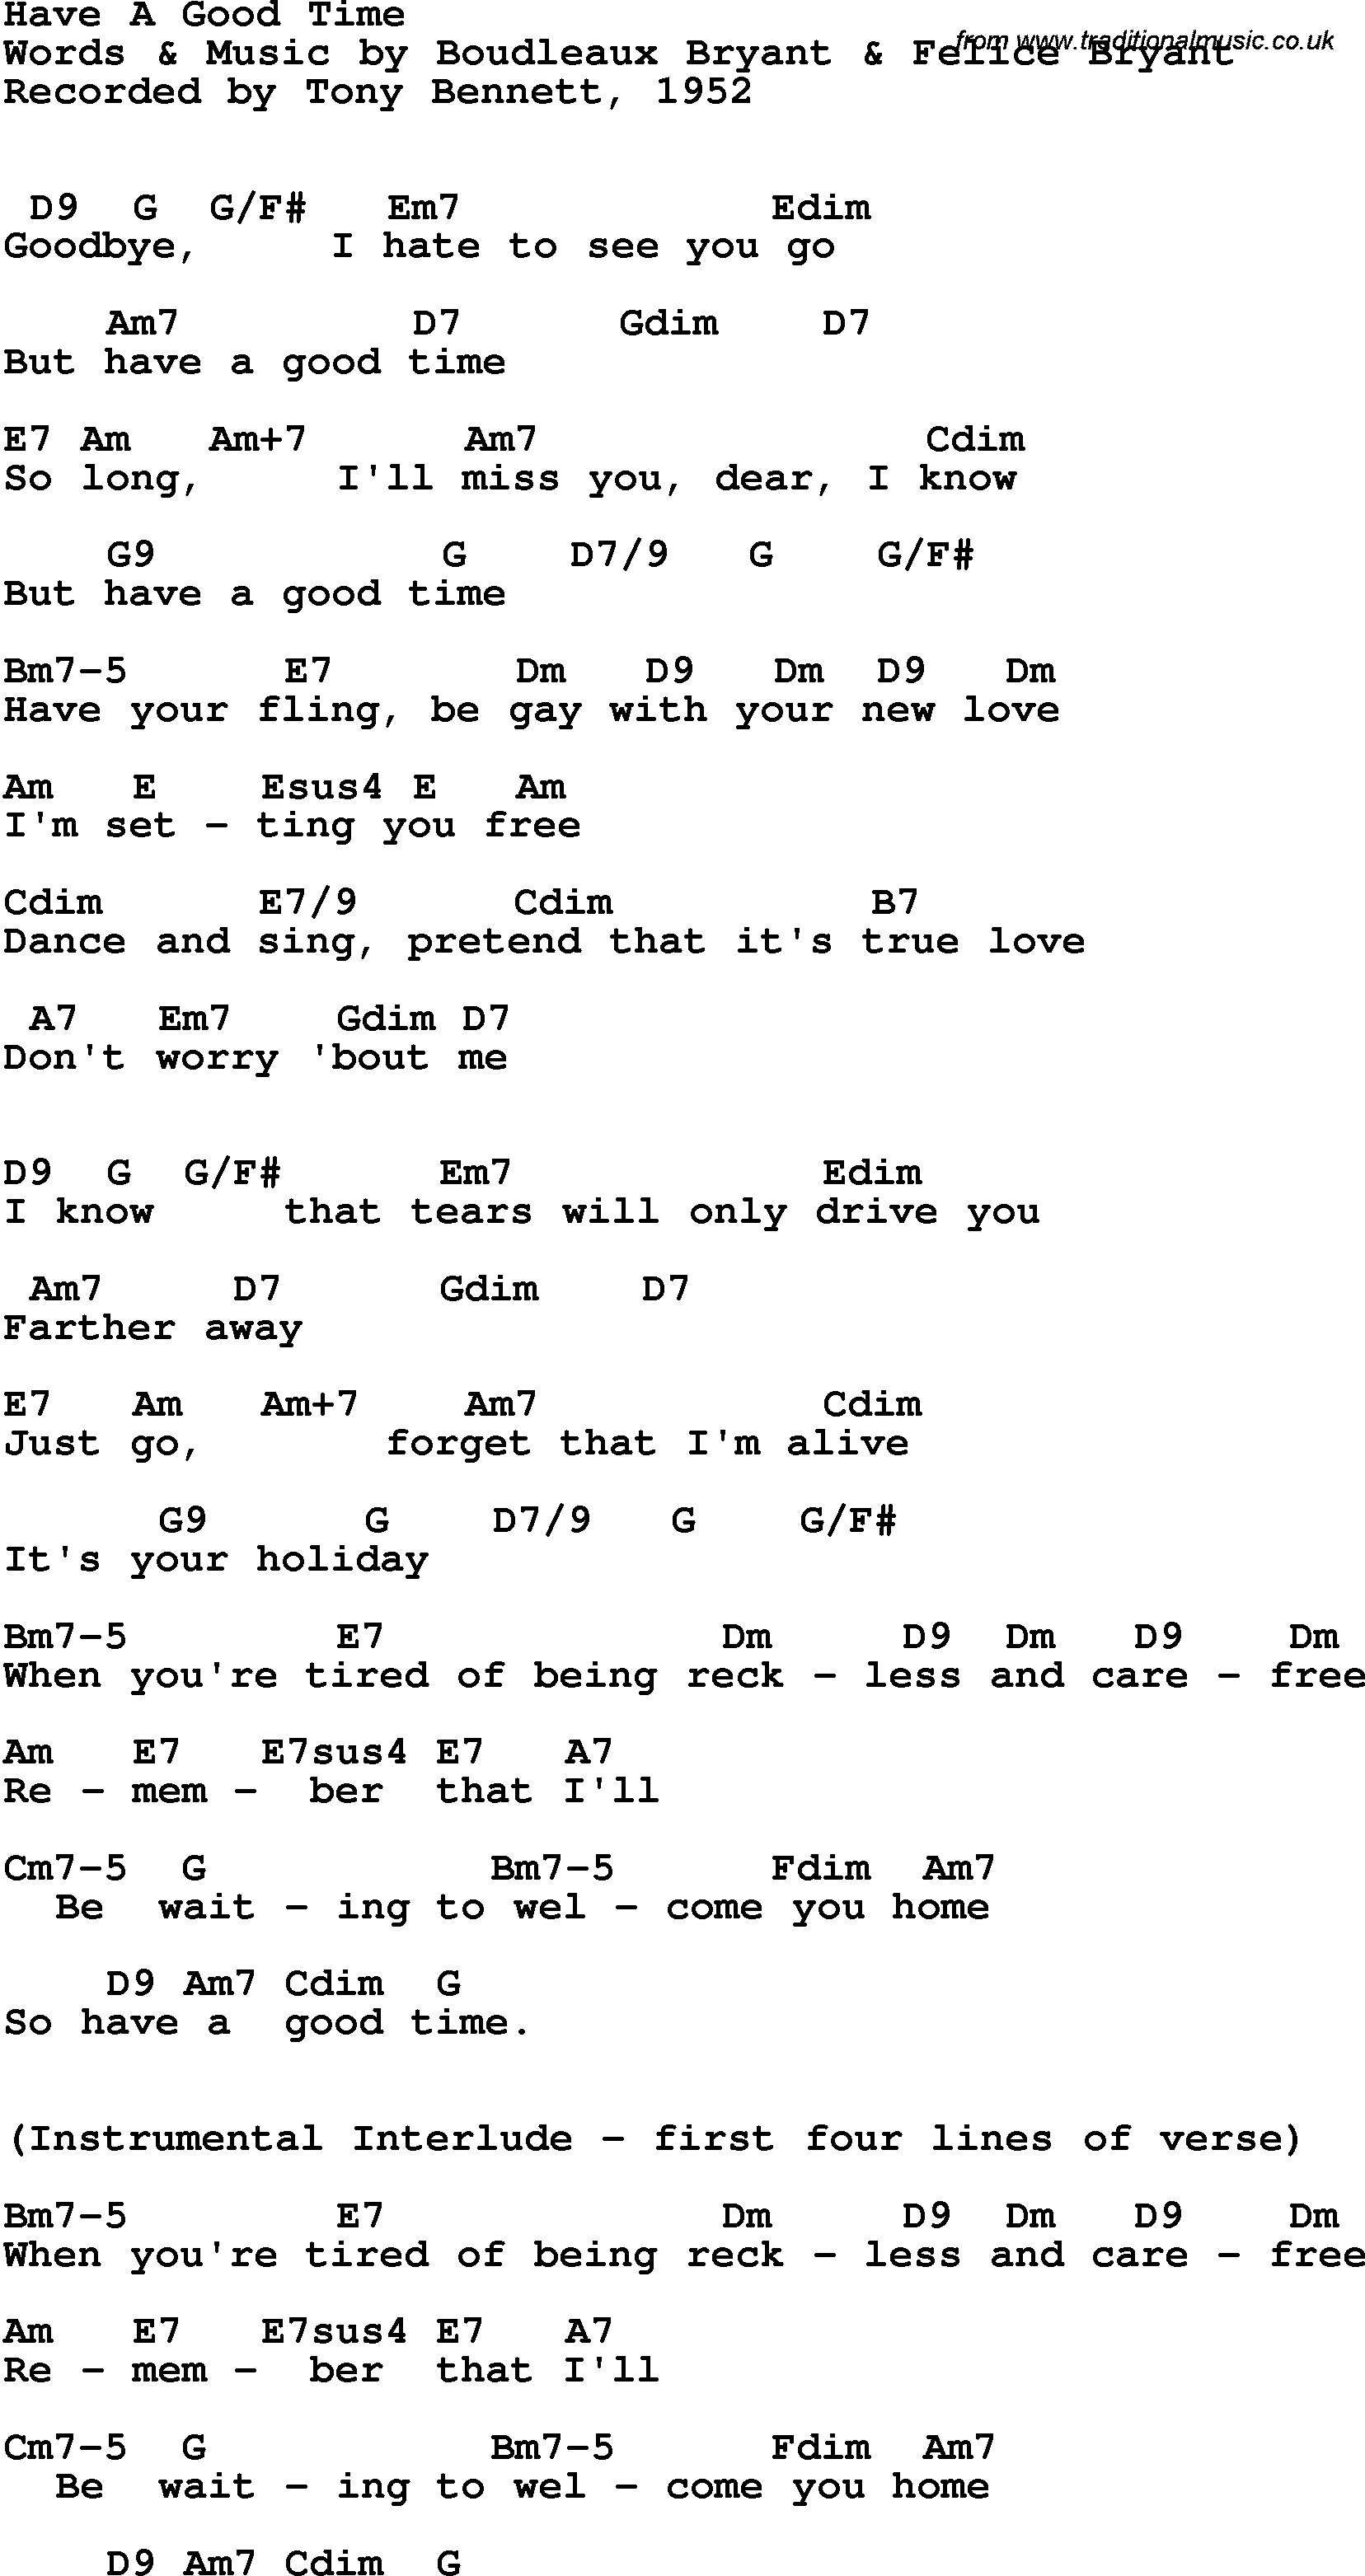 Song Lyrics with guitar chords for Have A Good Time - Tony Bennett, 1952